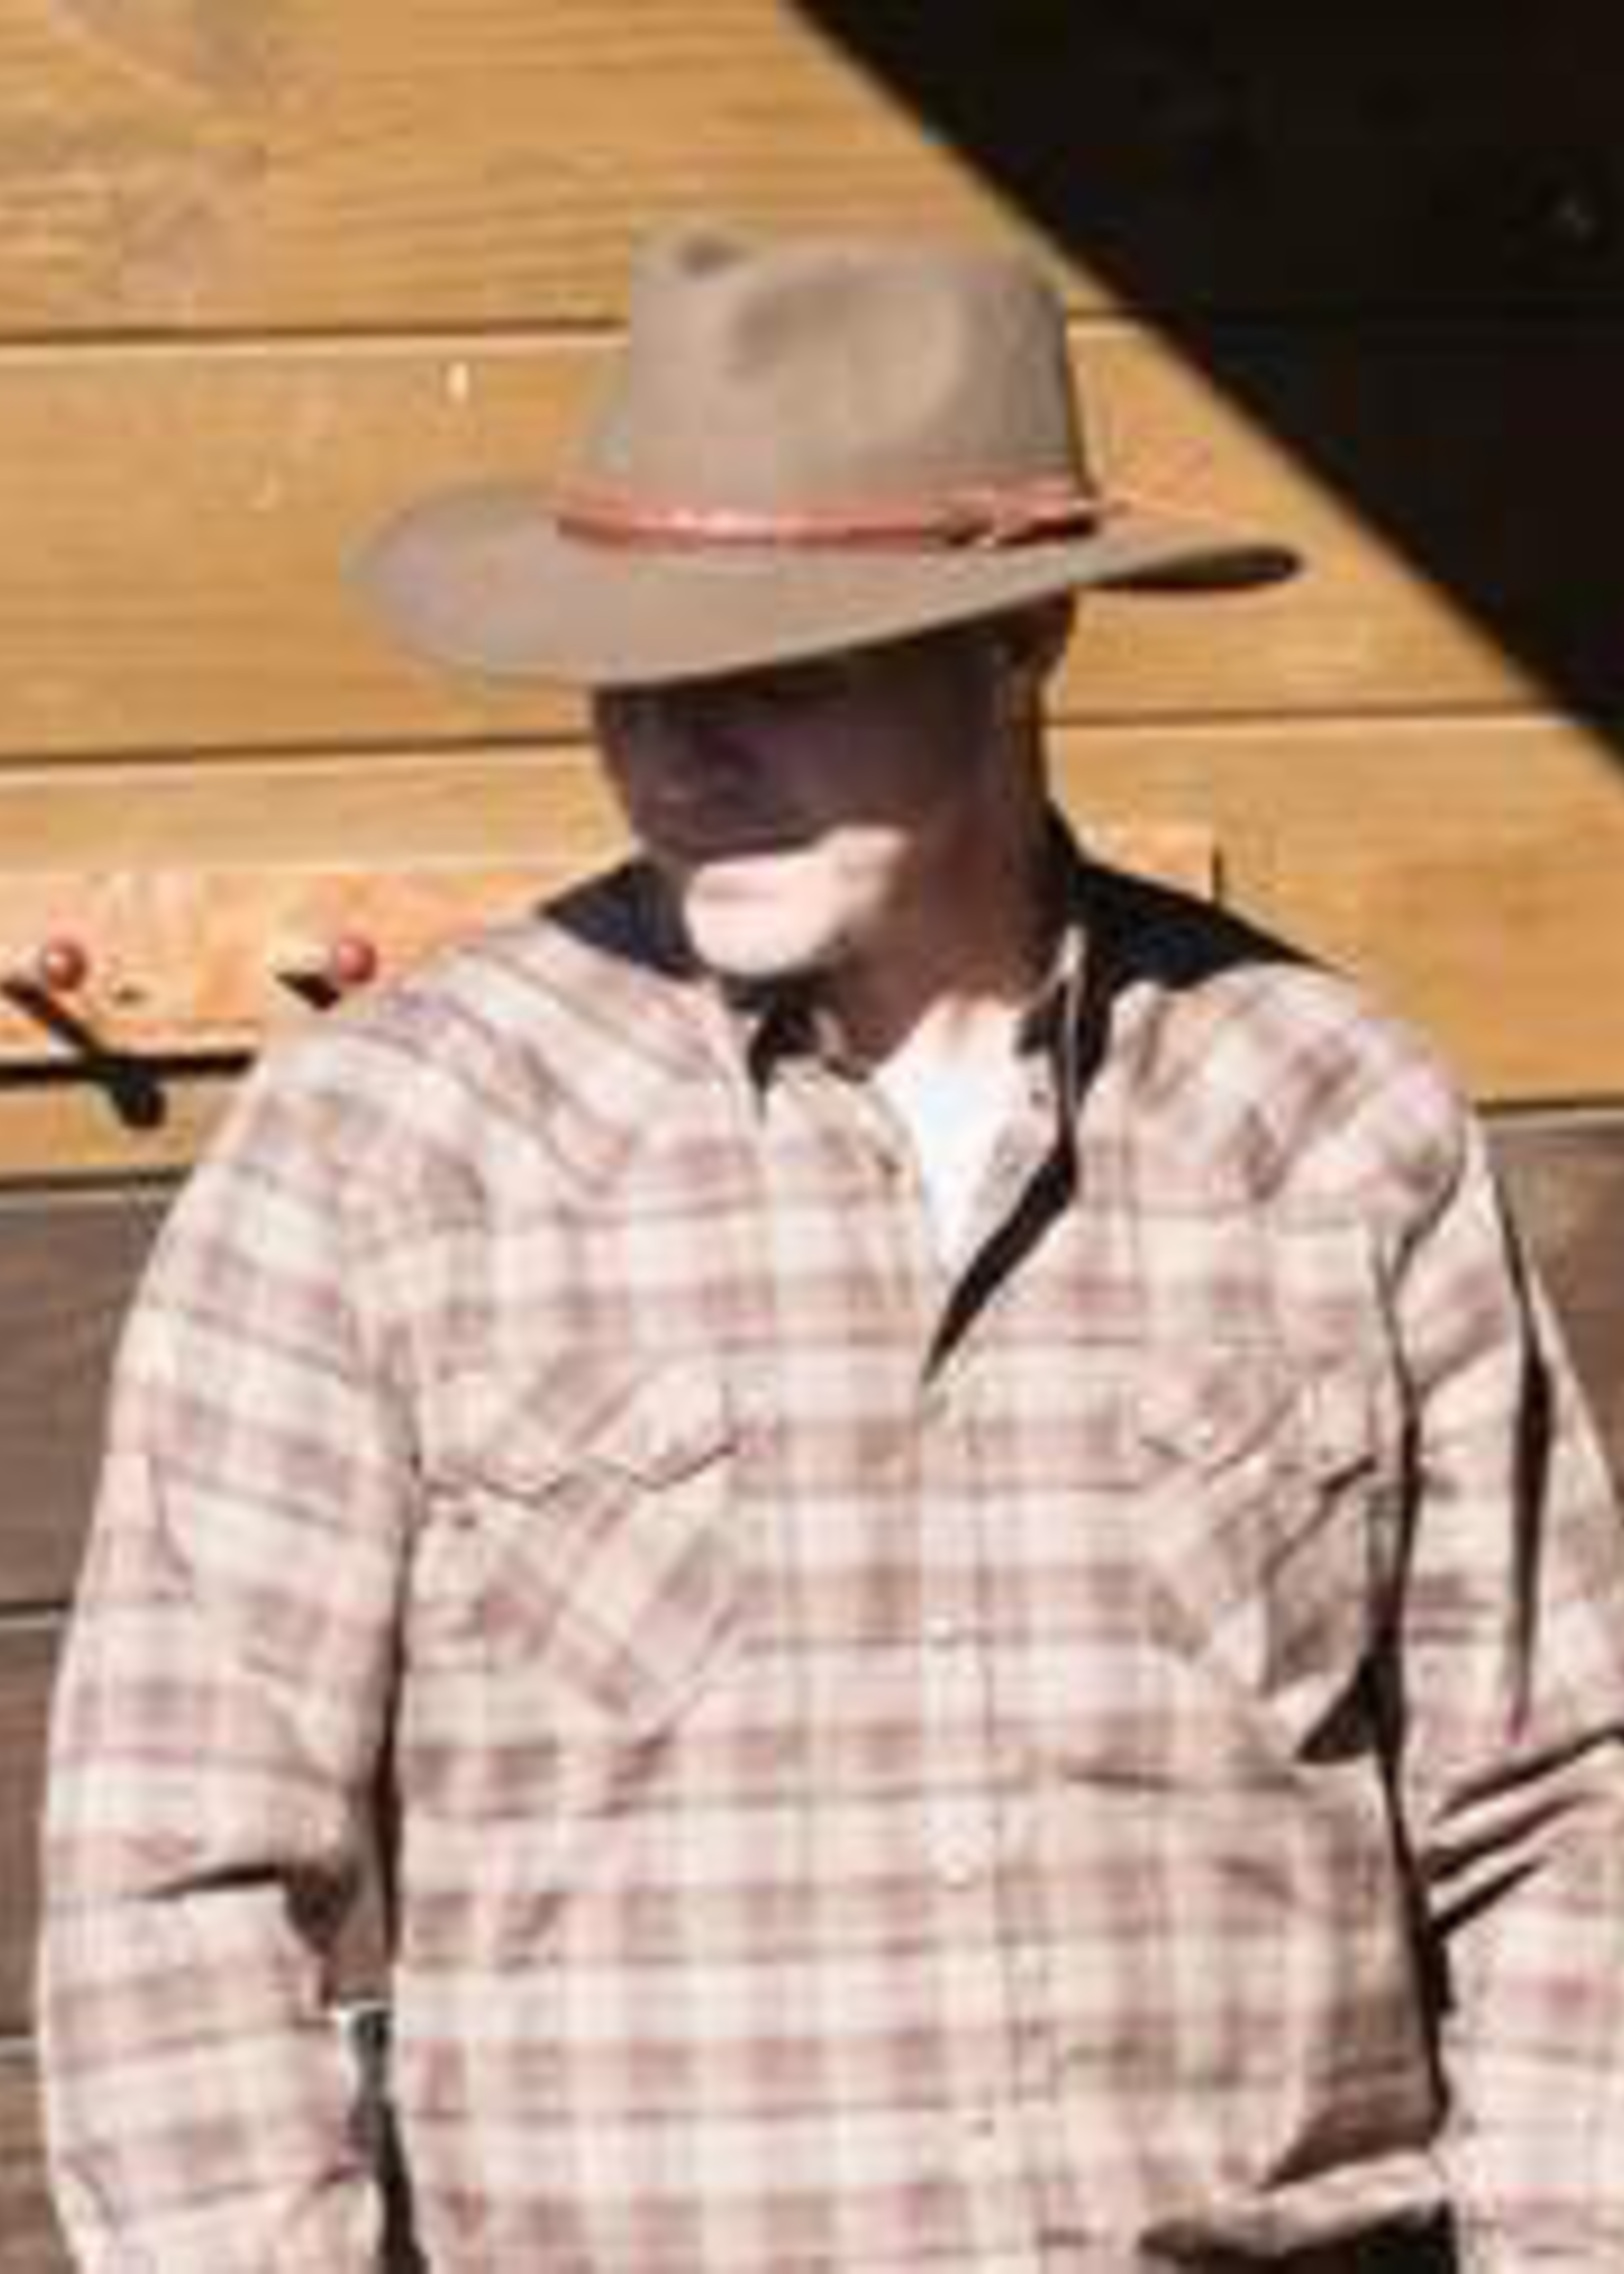 Hats OUTBACK Dusty Rider No.1379